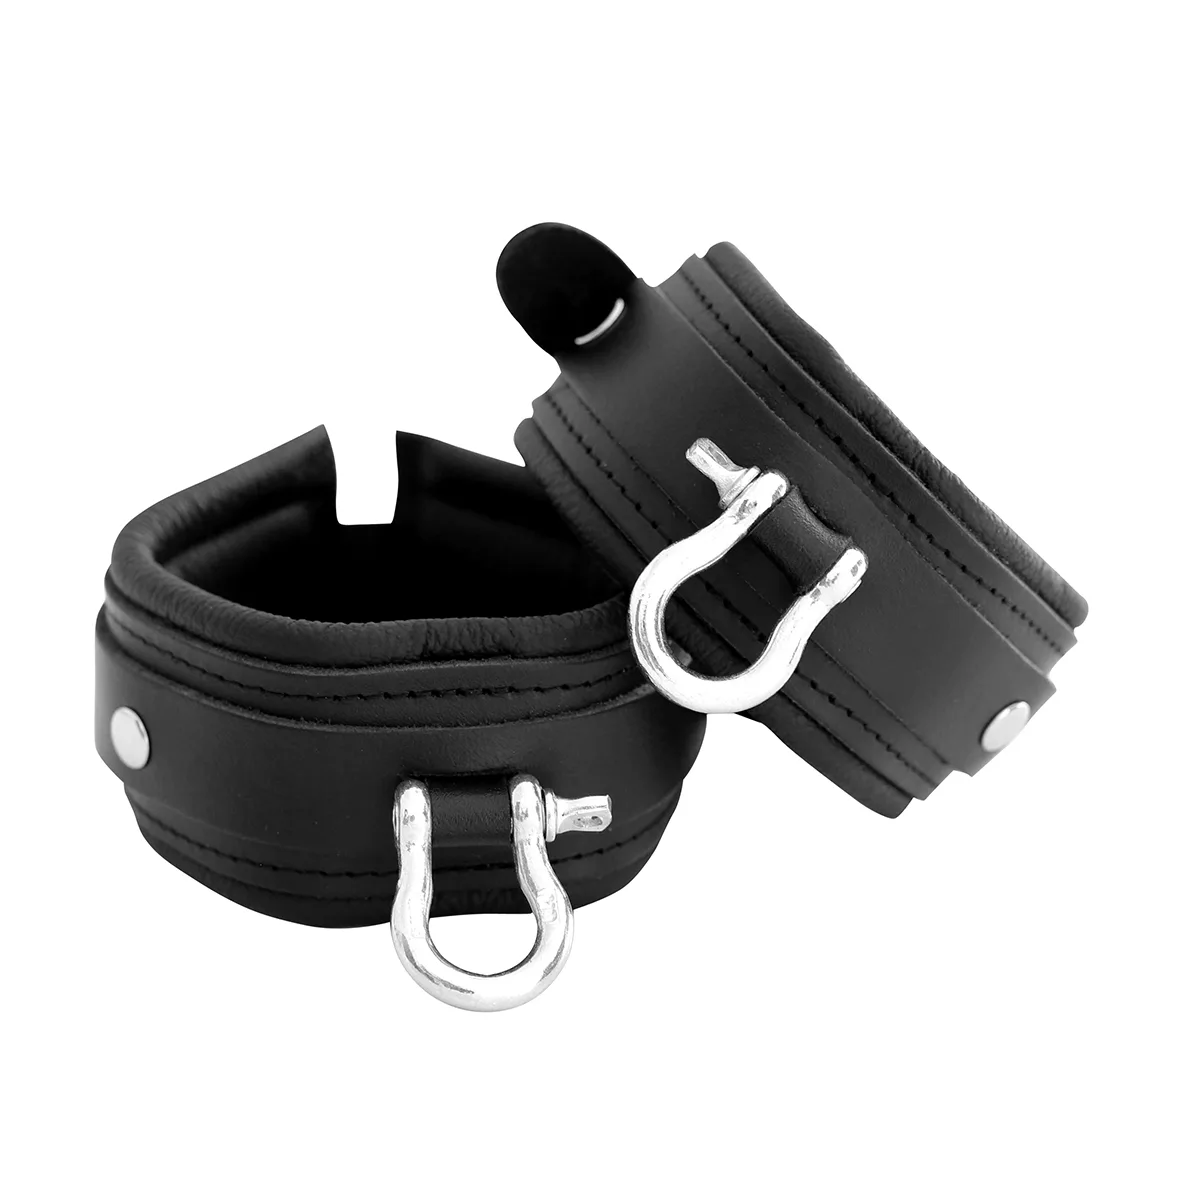 Leather Ankle cuffs with Metal Shackle